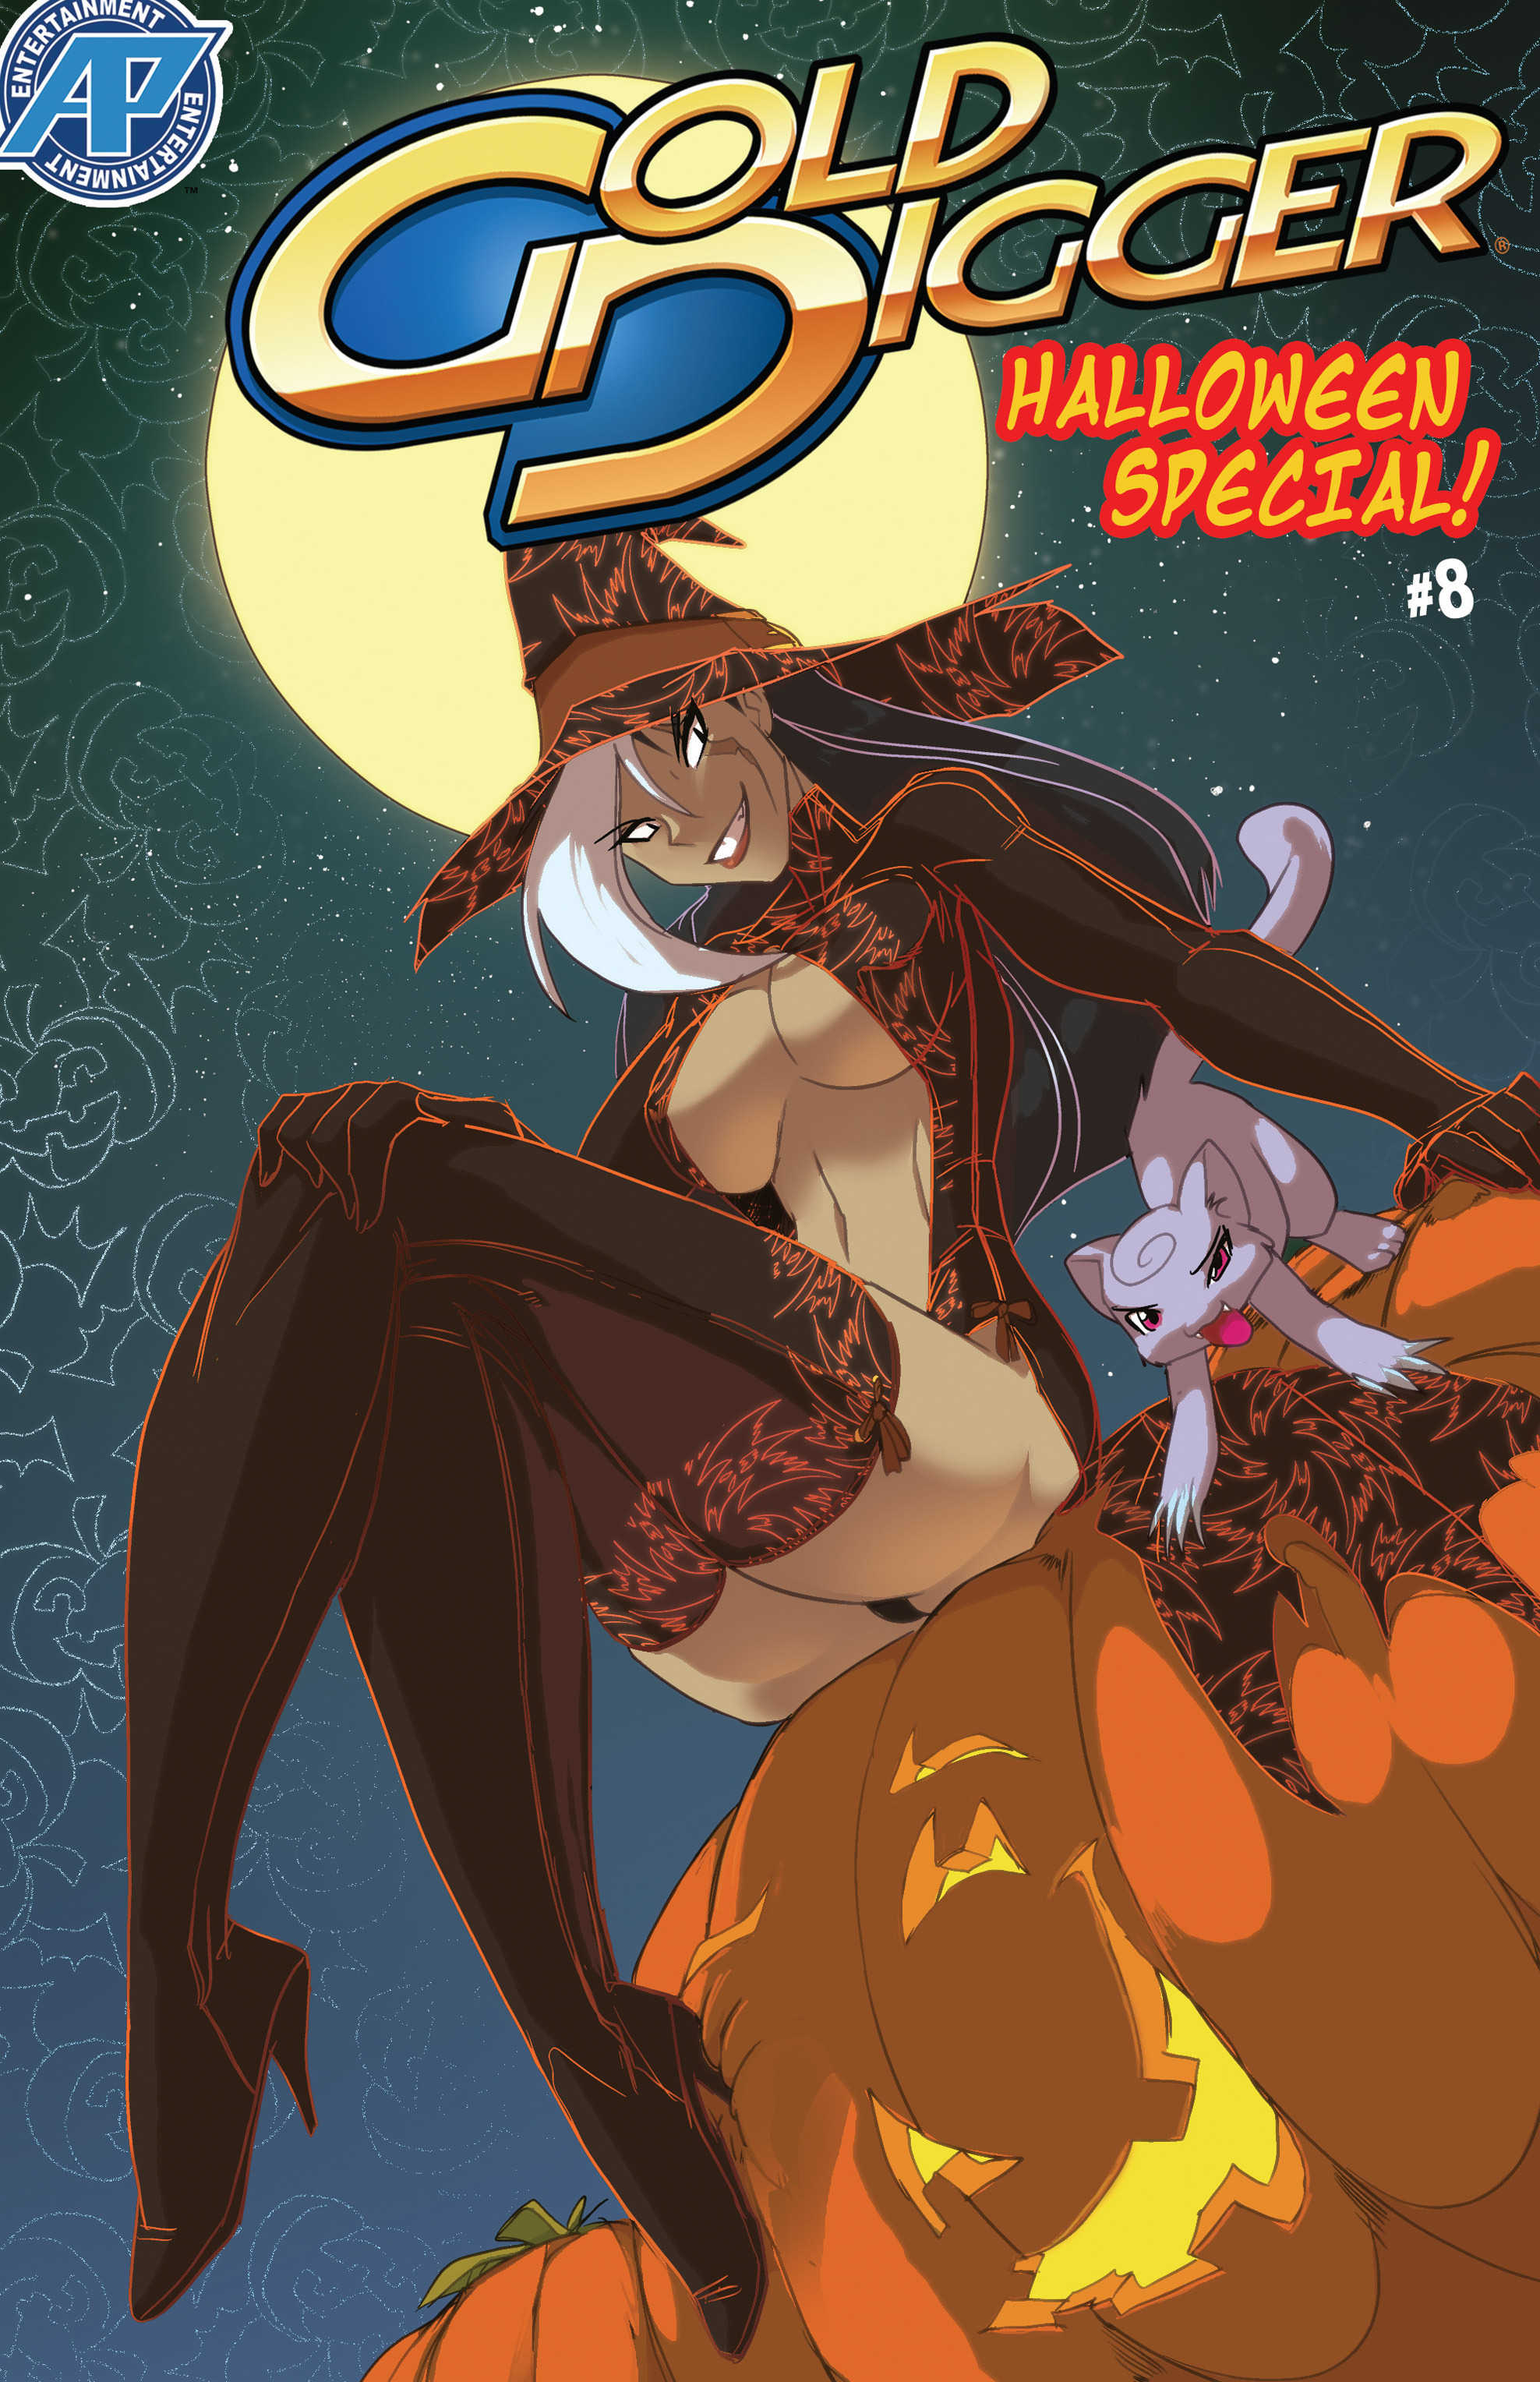 Read online Gold Digger Halloween Special comic -  Issue #8 - 1